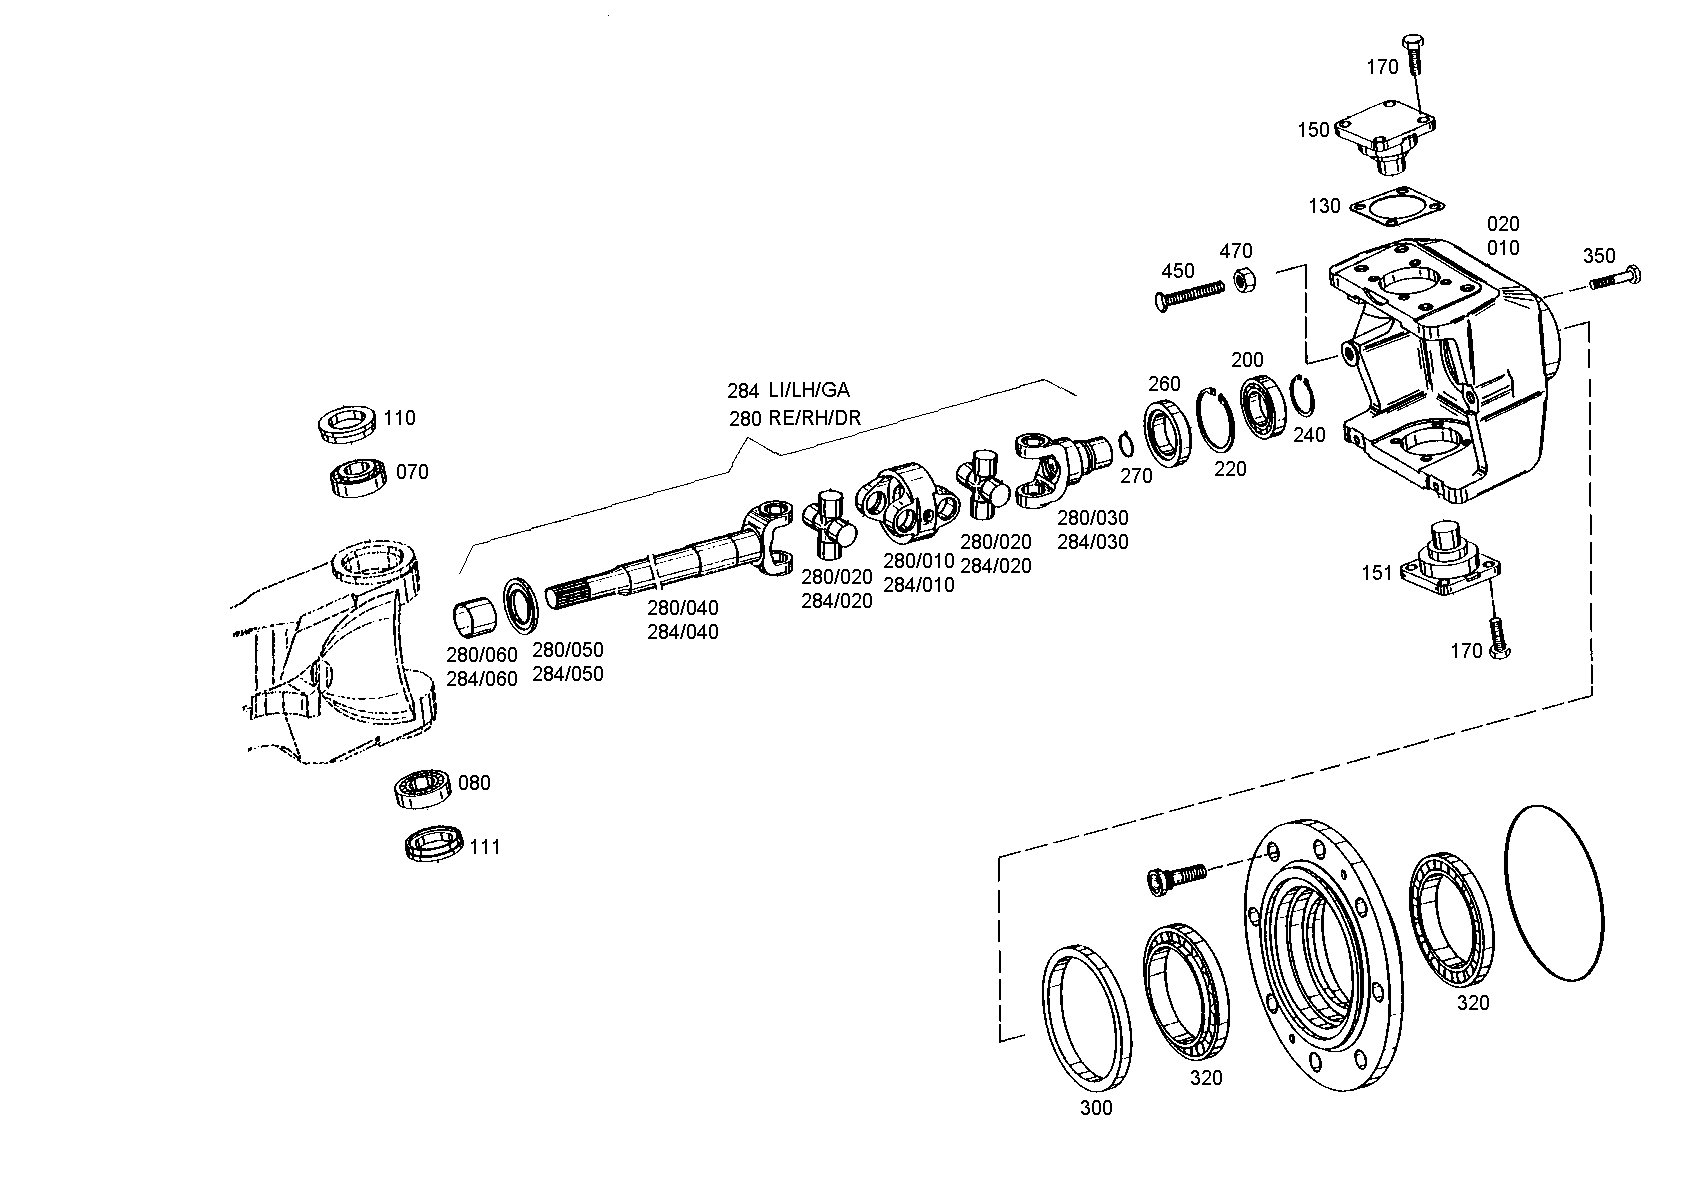 drawing for AGCO F510300021040 - JOINT HOUSING (figure 2)